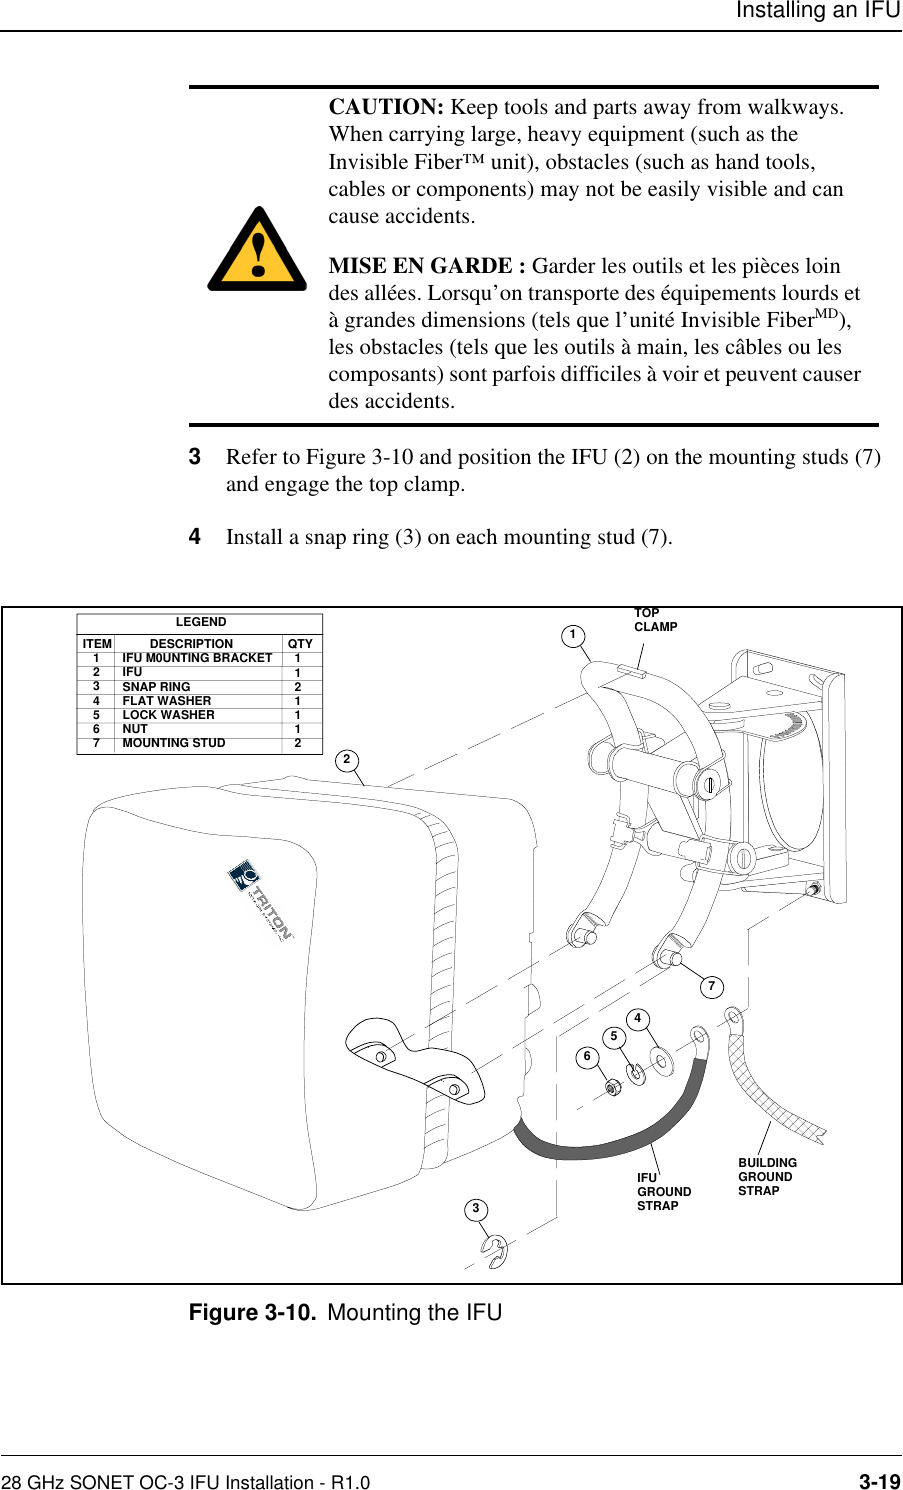 Installing an IFU28 GHz SONET OC-3 IFU Installation - R1.0 3-193Refer to Figure 3-10 and position the IFU (2) on the mounting studs (7) and engage the top clamp.4Install a snap ring (3) on each mounting stud (7). Figure 3-10. Mounting the IFUCAUTION: Keep tools and parts away from walkways. When carrying large, heavy equipment (such as the Invisible Fiber™ unit), obstacles (such as hand tools, cables or components) may not be easily visible and can cause accidents.MISE EN GARDE : Garder les outils et les pièces loin des allées. Lorsqu’on transporte des équipements lourds et à grandes dimensions (tels que l’unité Invisible FiberMD), les obstacles (tels que les outils à main, les câbles ou les composants) sont parfois difficiles à voir et peuvent causer des accidents.345621LEGENDITEM   1   2   3   4   5   6   7           DESCRIPTIONIFU M0UNTING BRACKETIFUSNAP RINGFLAT WASHERLOCK WASHERNUTMOUNTING STUDQTY  1  1  2  1  1  1  2  IFU GROUNDSTRAP7BUILDINGGROUNDSTRAPTOPCLAMP